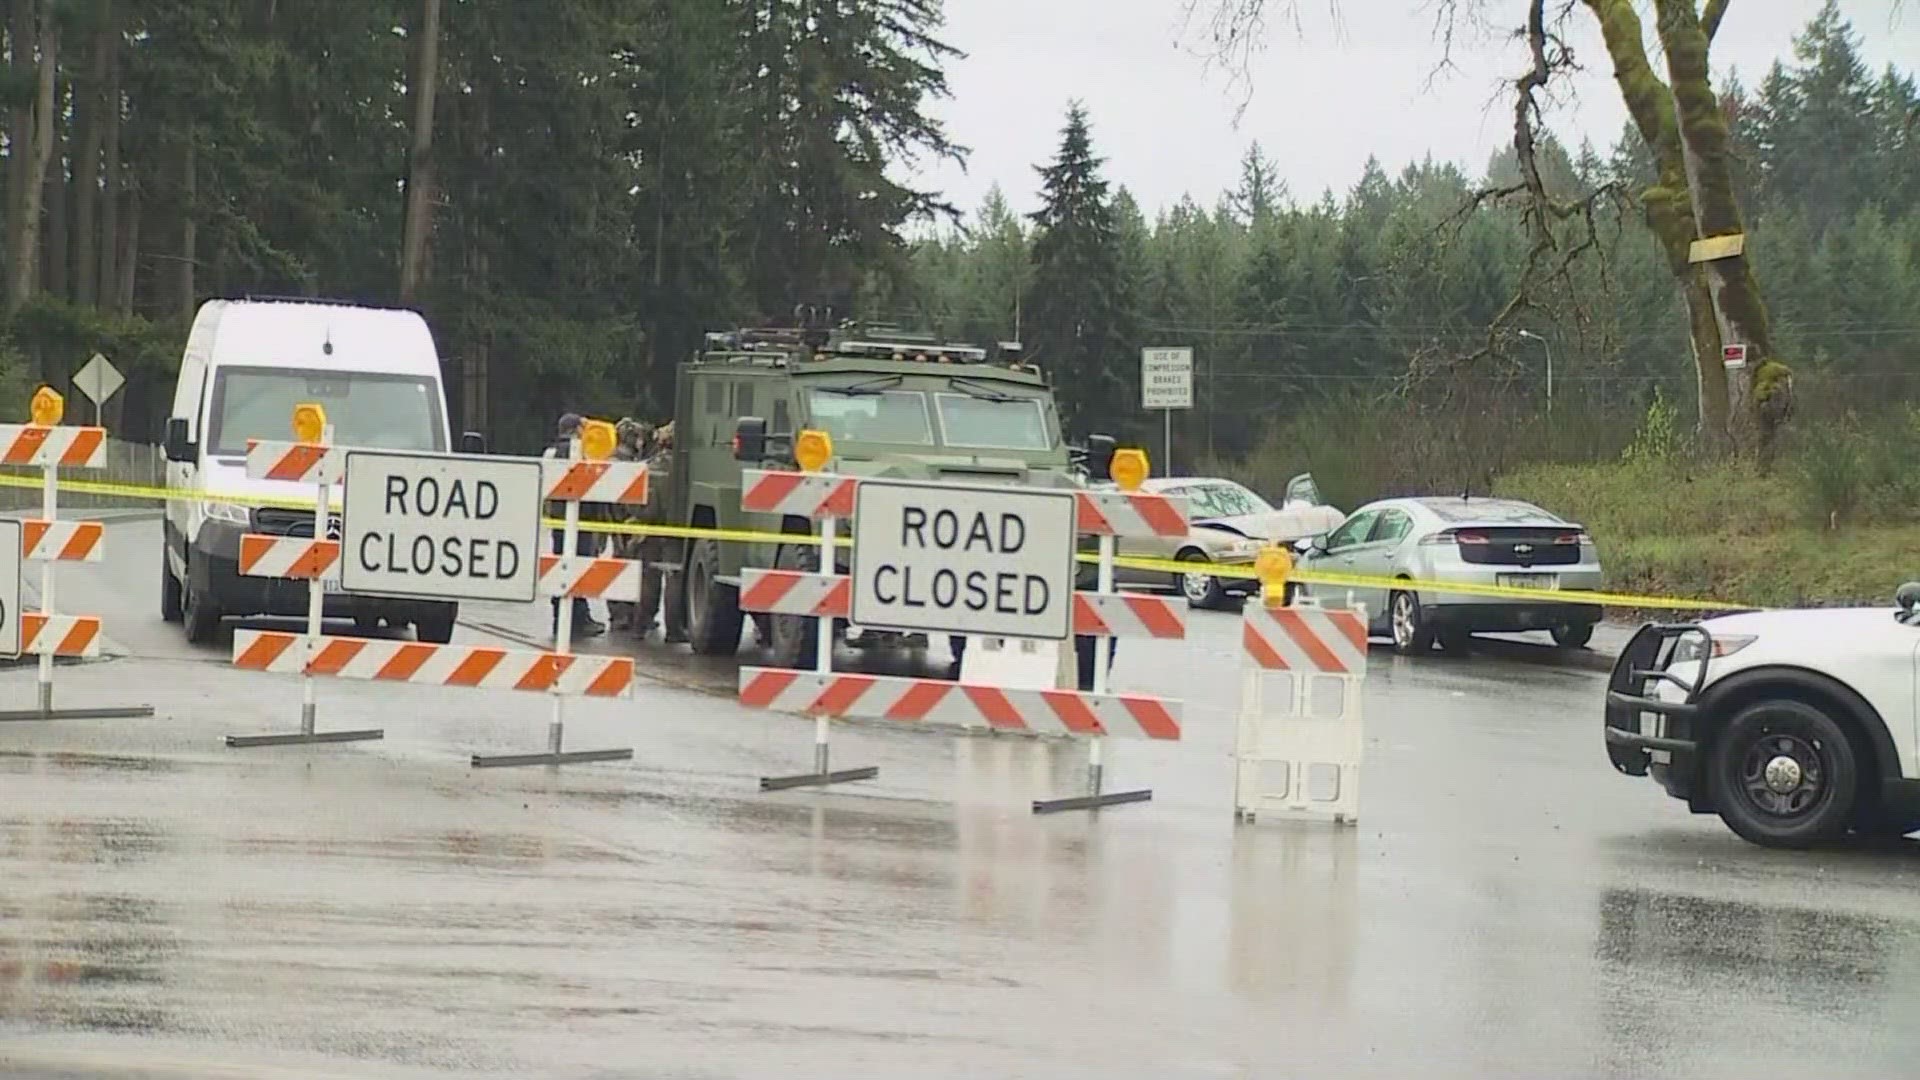 Pierce County authorities are investigating after a woman was found dead with a gunshot wound following a collision in Spanaway early Wednesday morning.